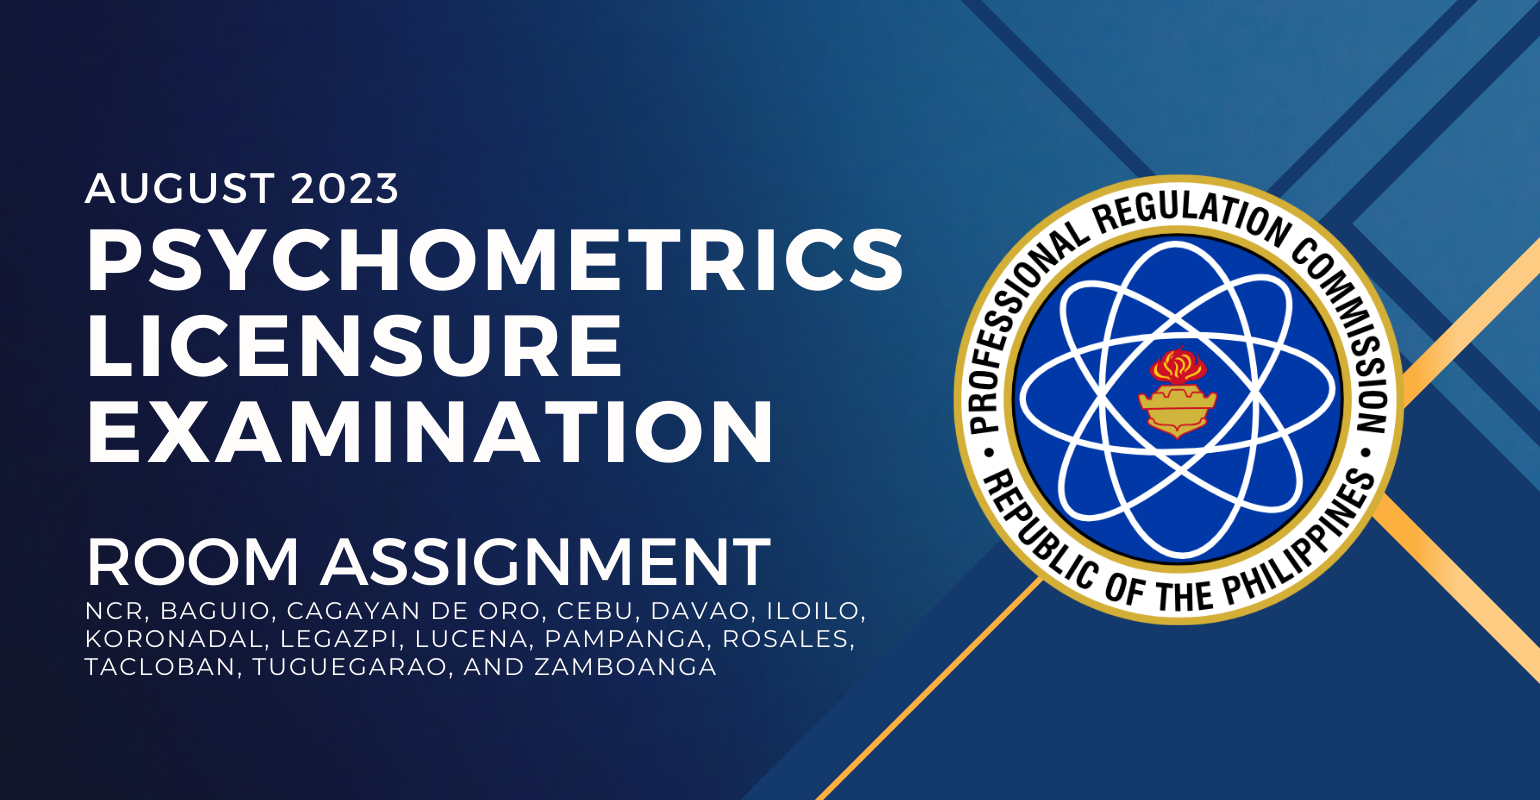 Room Assignment – August 2023 Psychometricians Licensure Exams